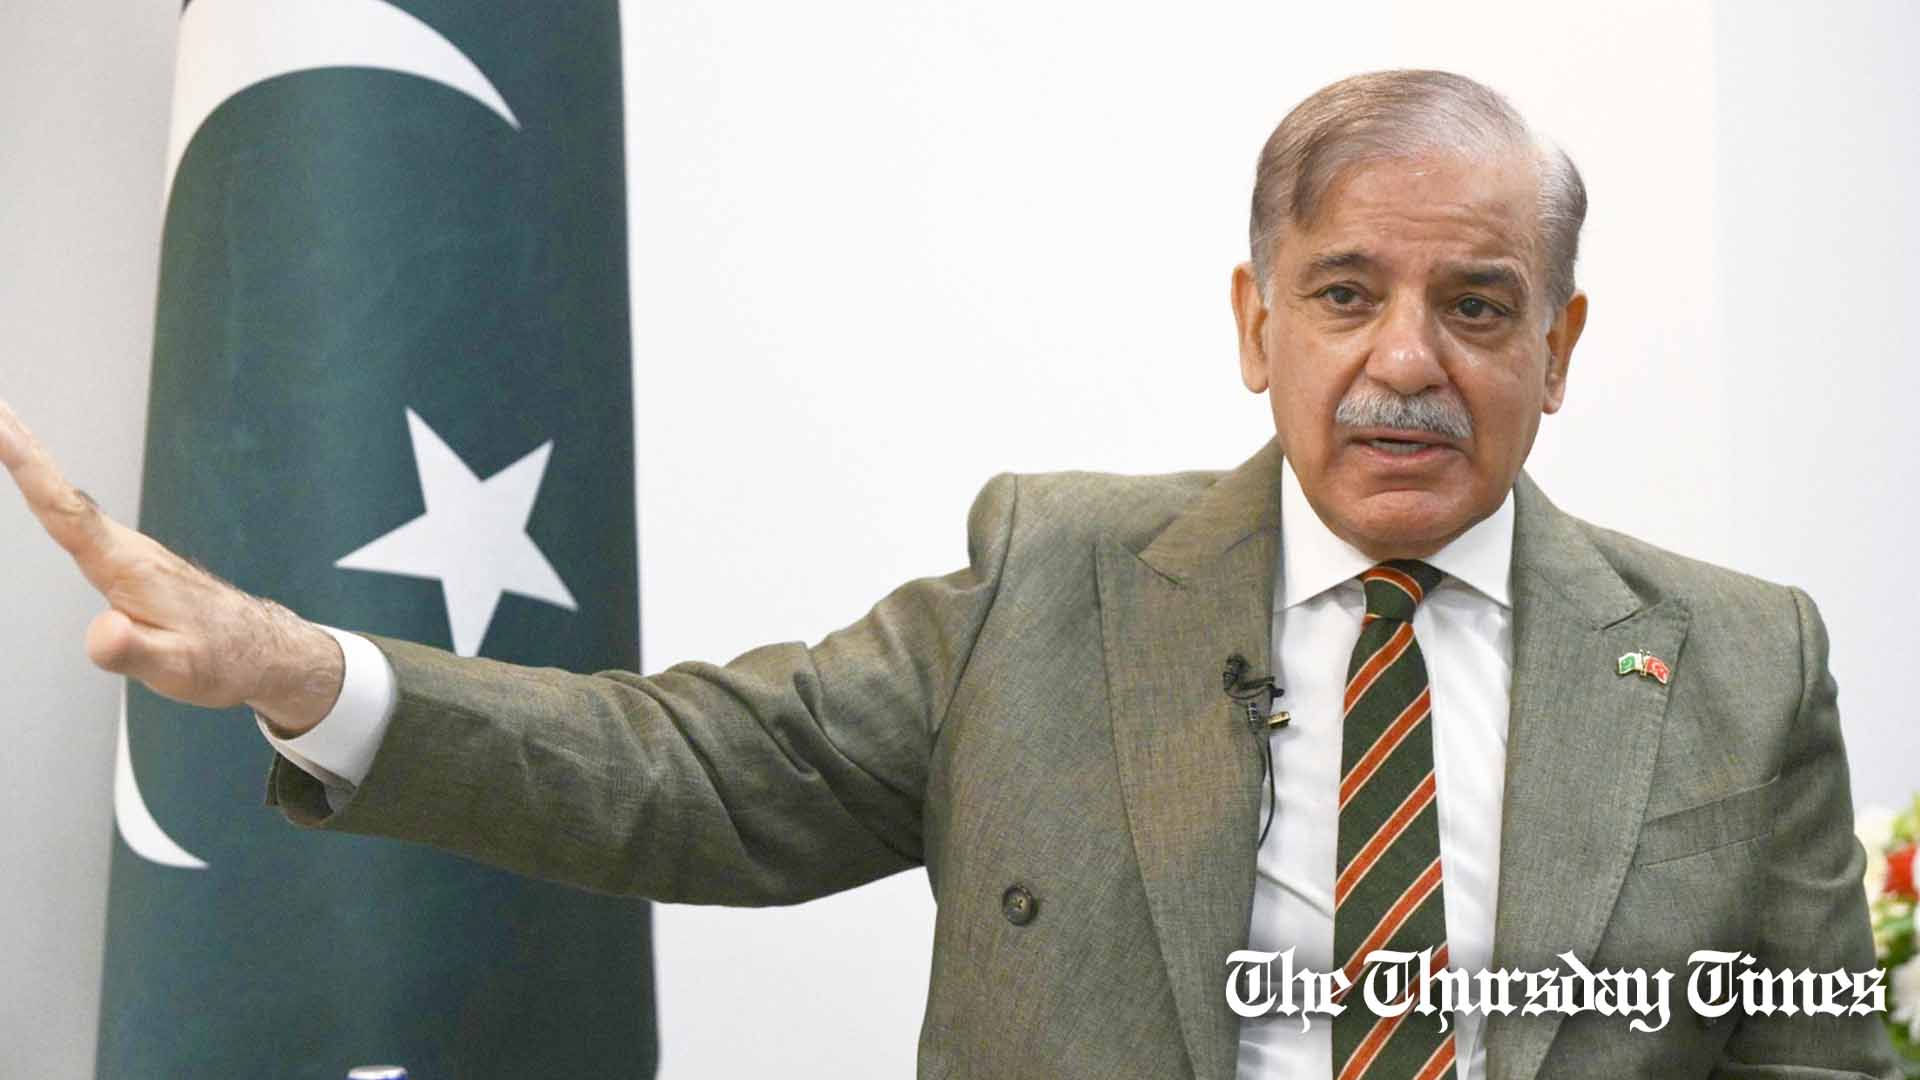 A file photo is shown of former primer minister and PML(N) chair Shehbaz Sharif. — FILE/THE THURSDAY TIMES